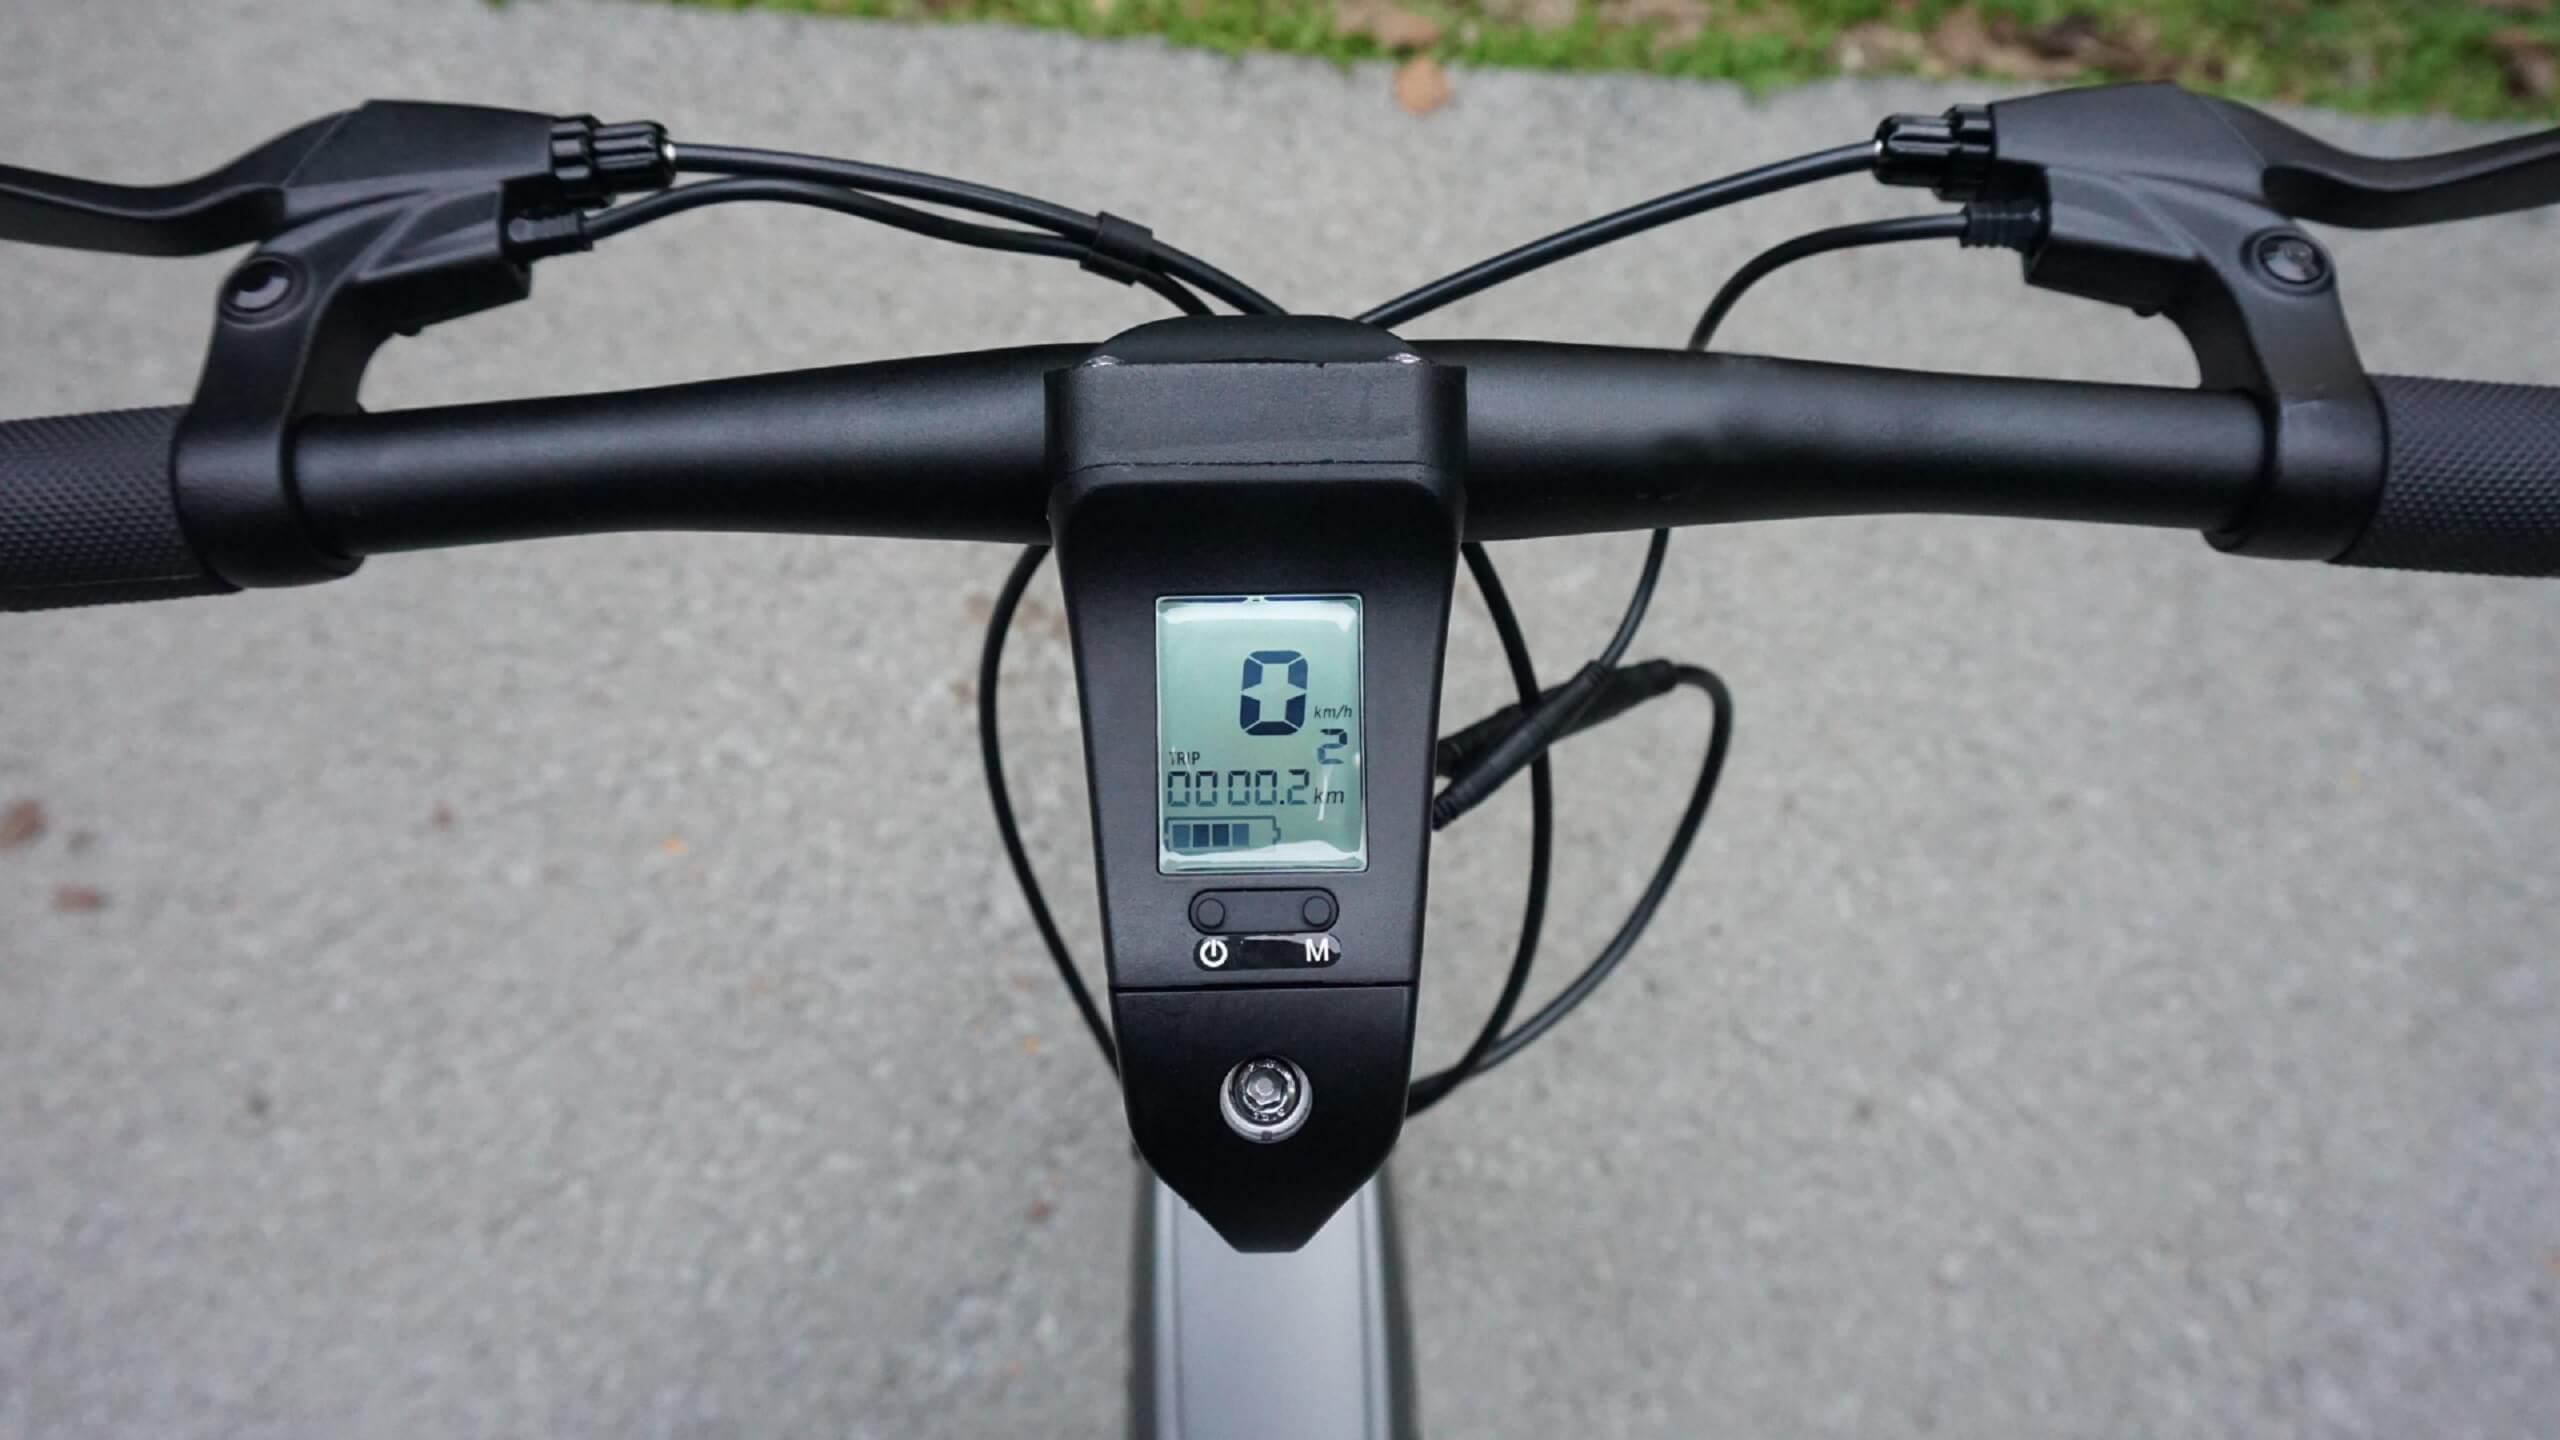 MOBOT OVO (SILVER) LTA approved ebike at Admitalty Park (3)